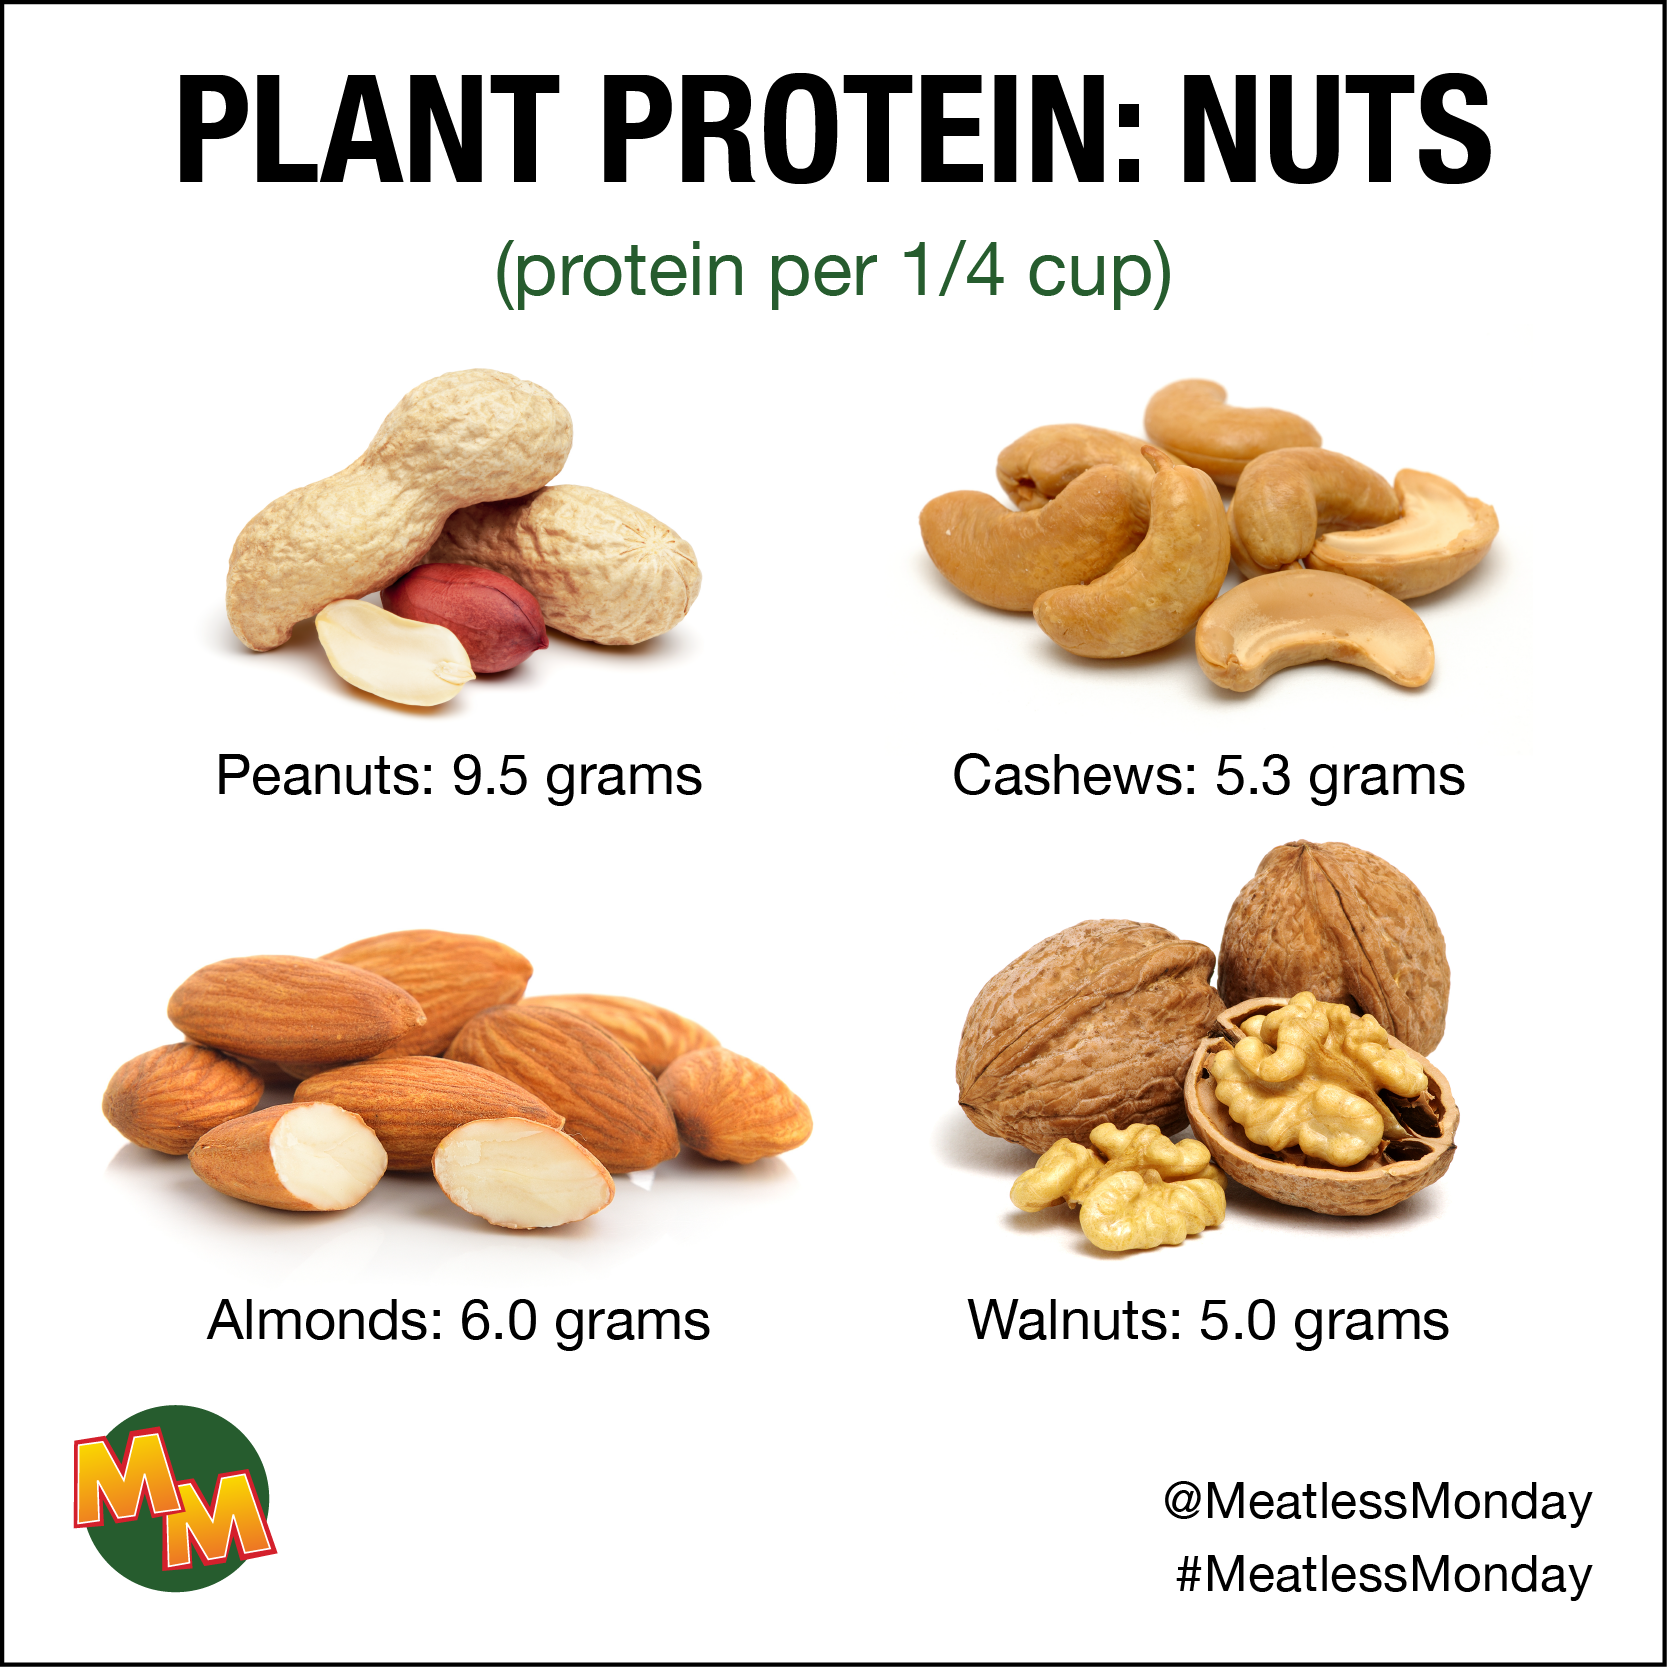 Plant protein: nuts